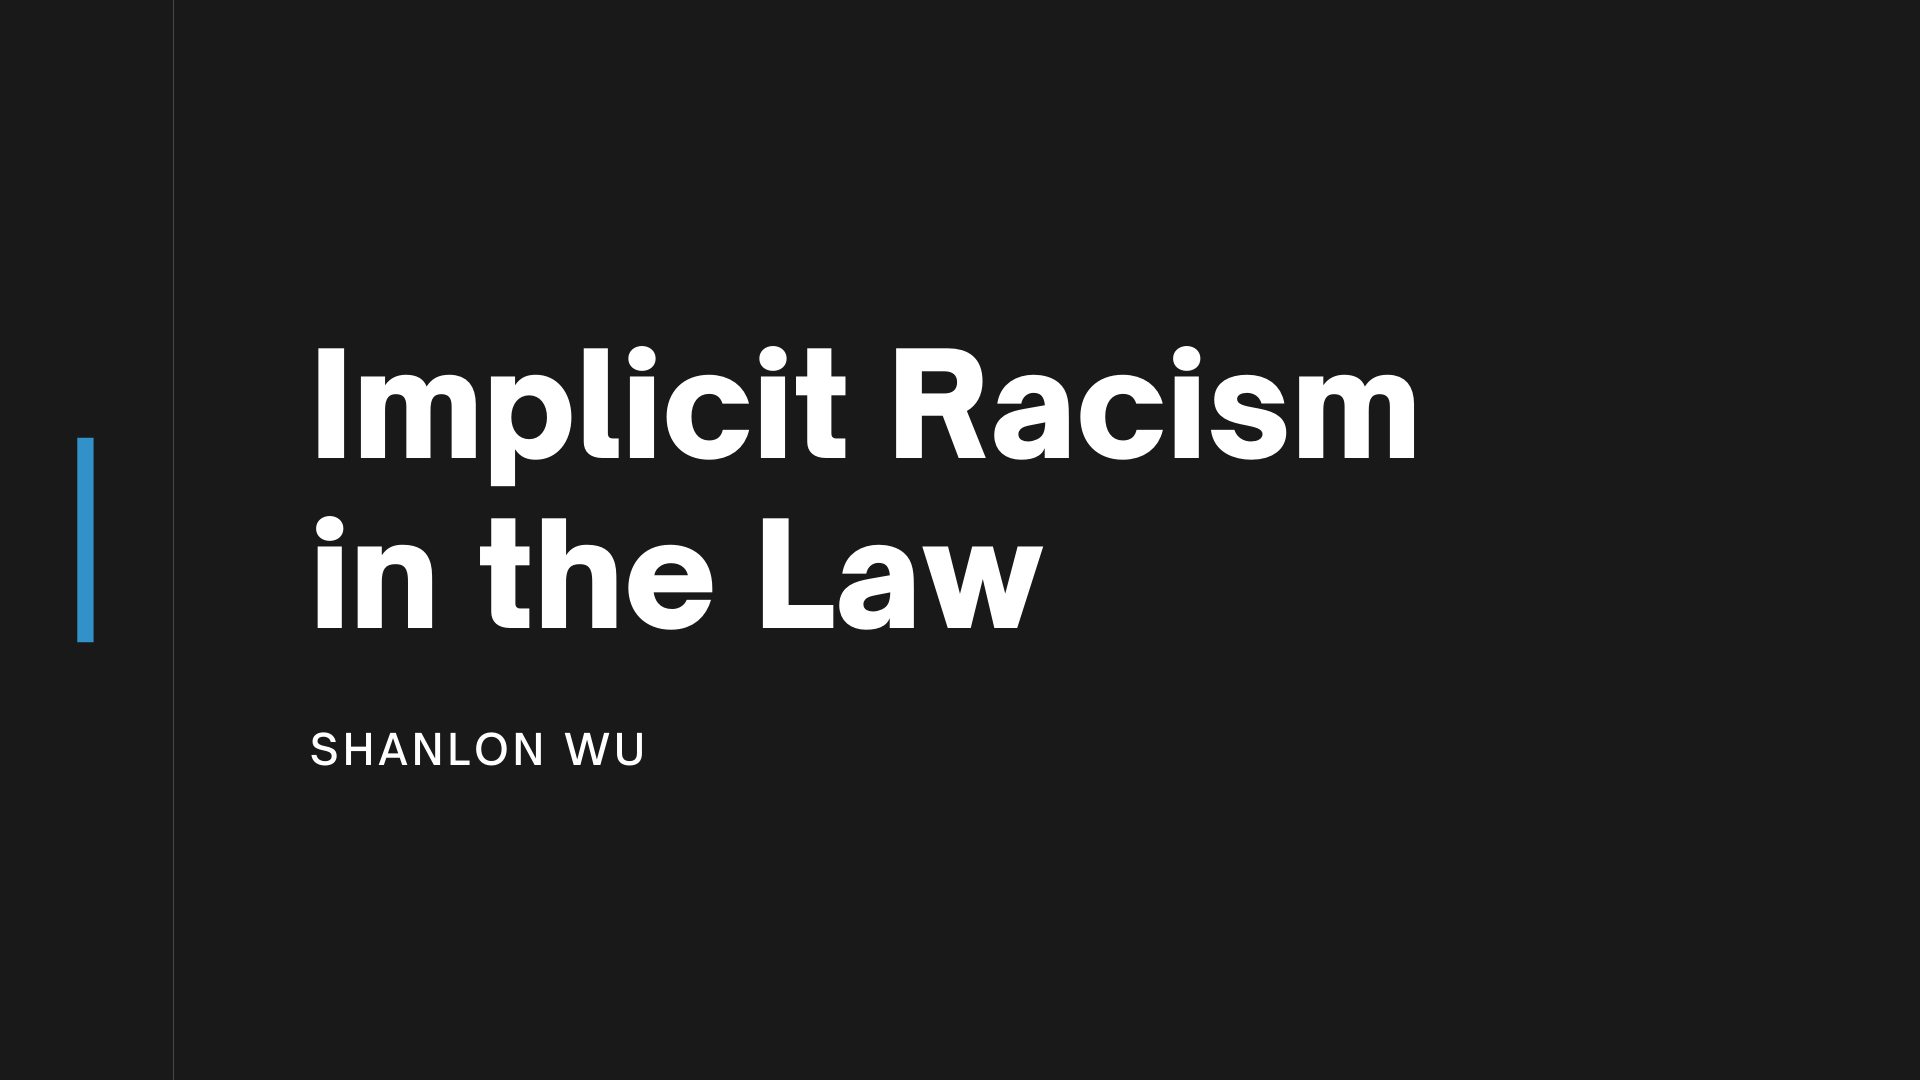 Implicit Racism in the Law - shanlon wu